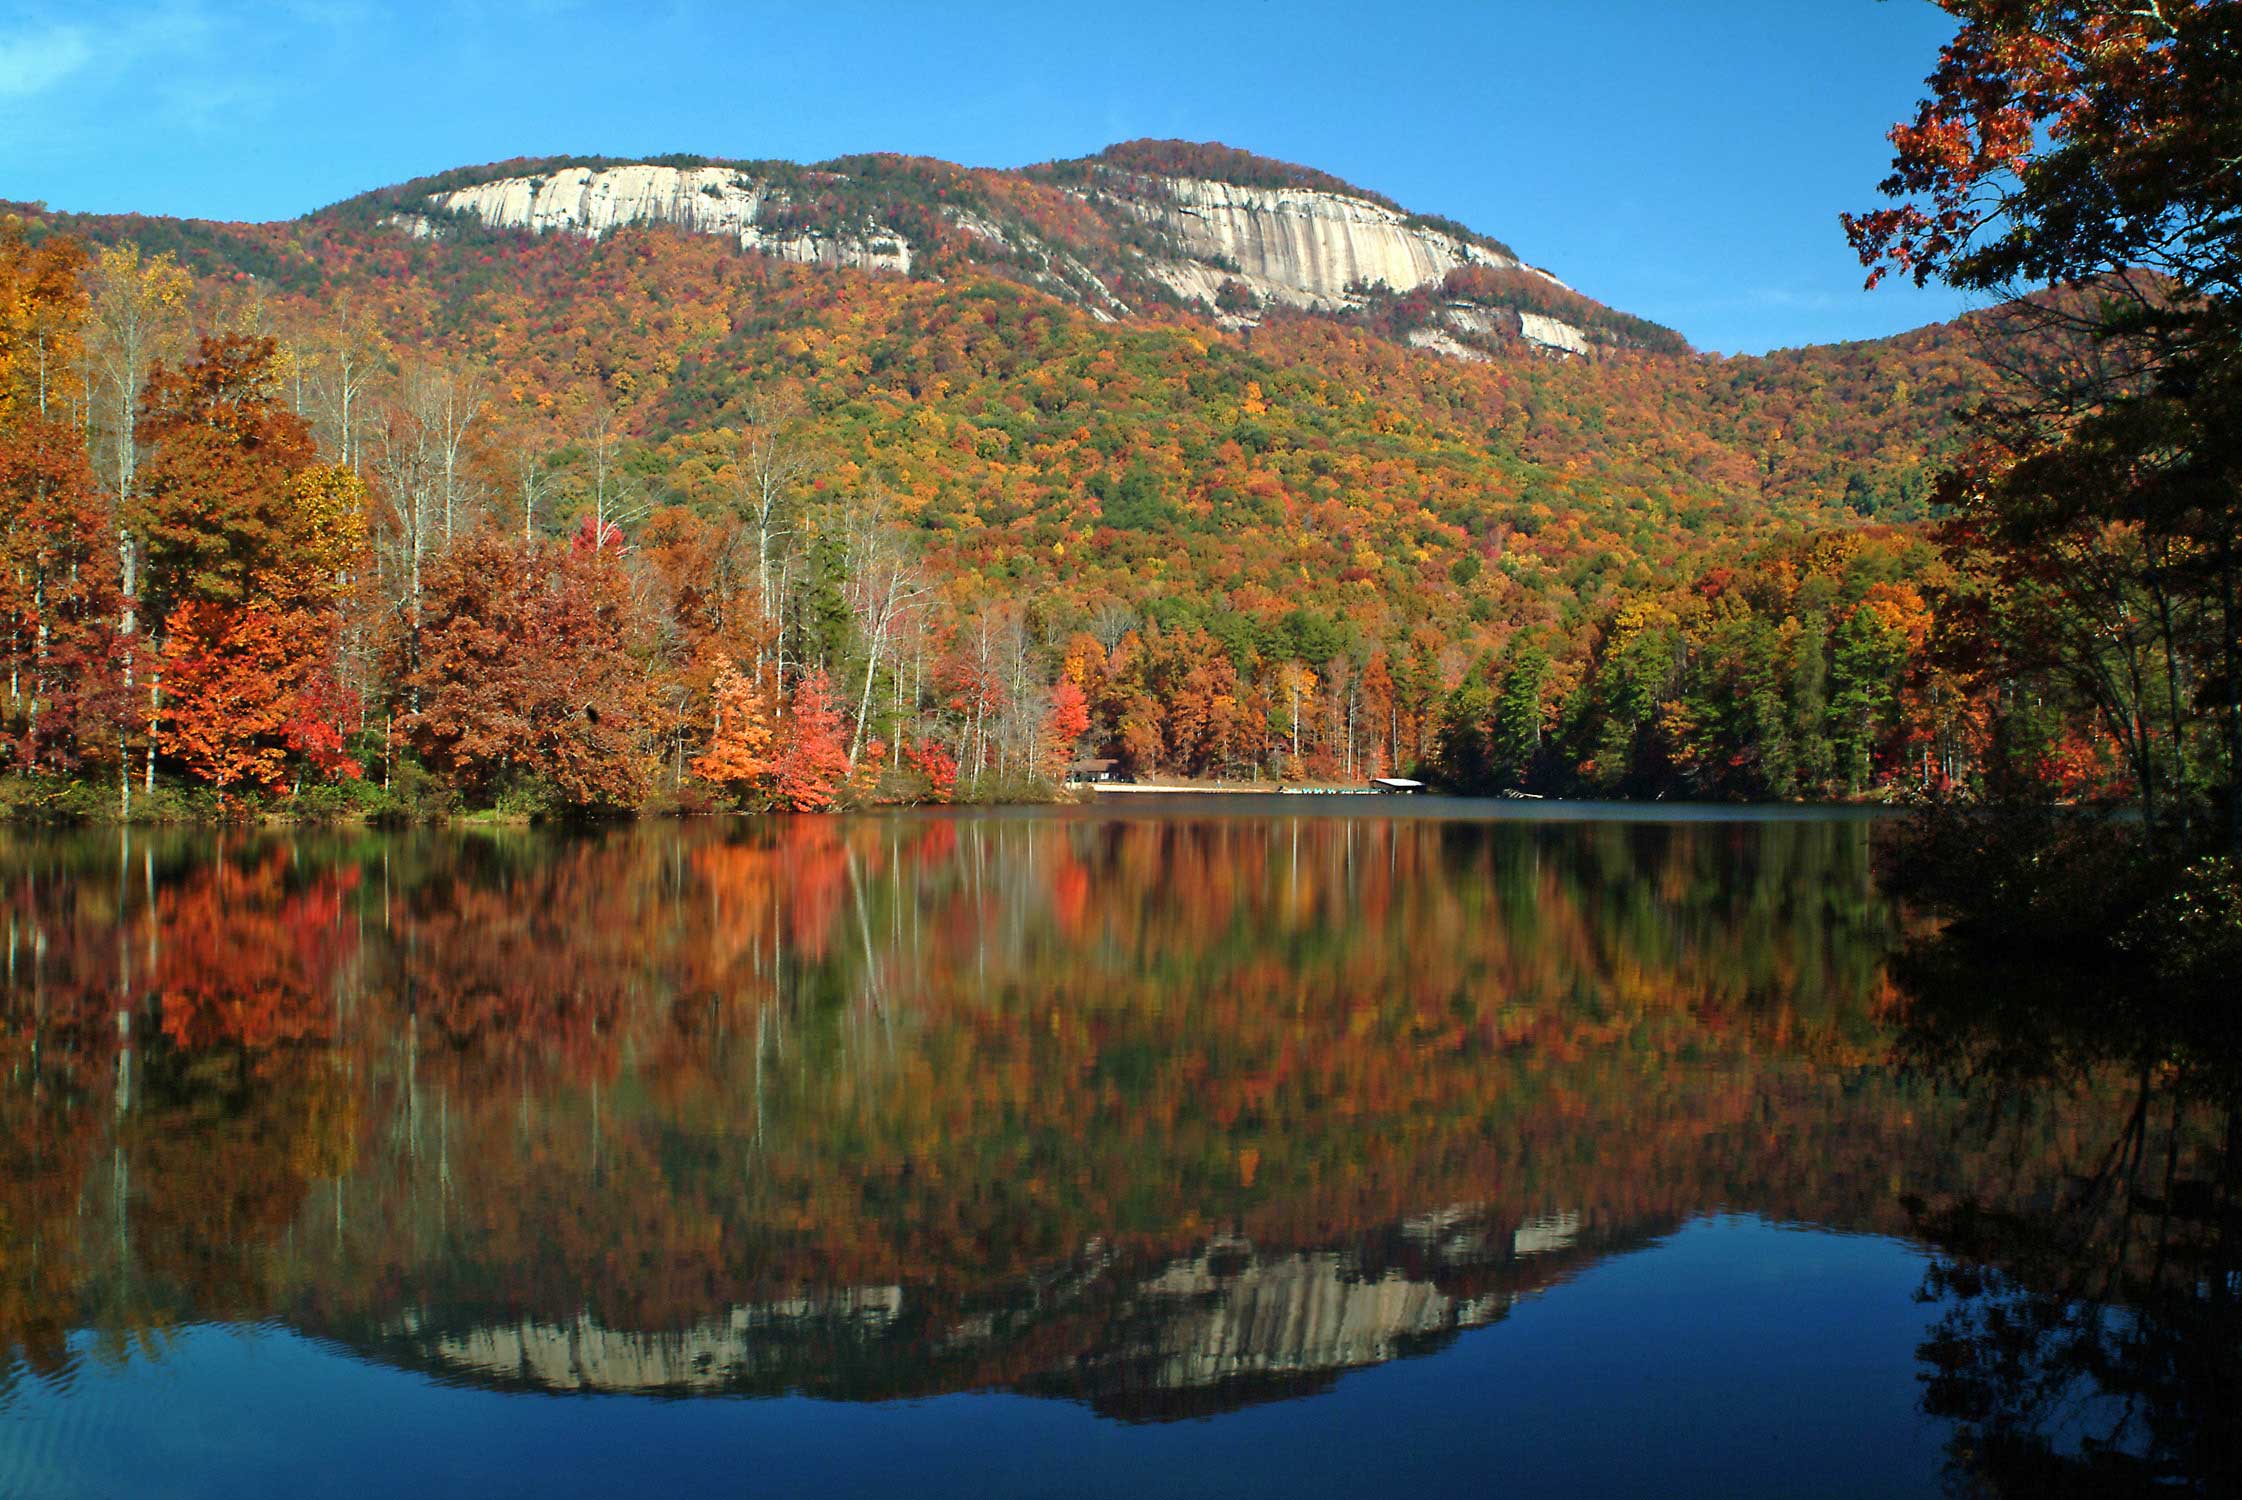 Table rock in the fall.Souce: pixabay.com